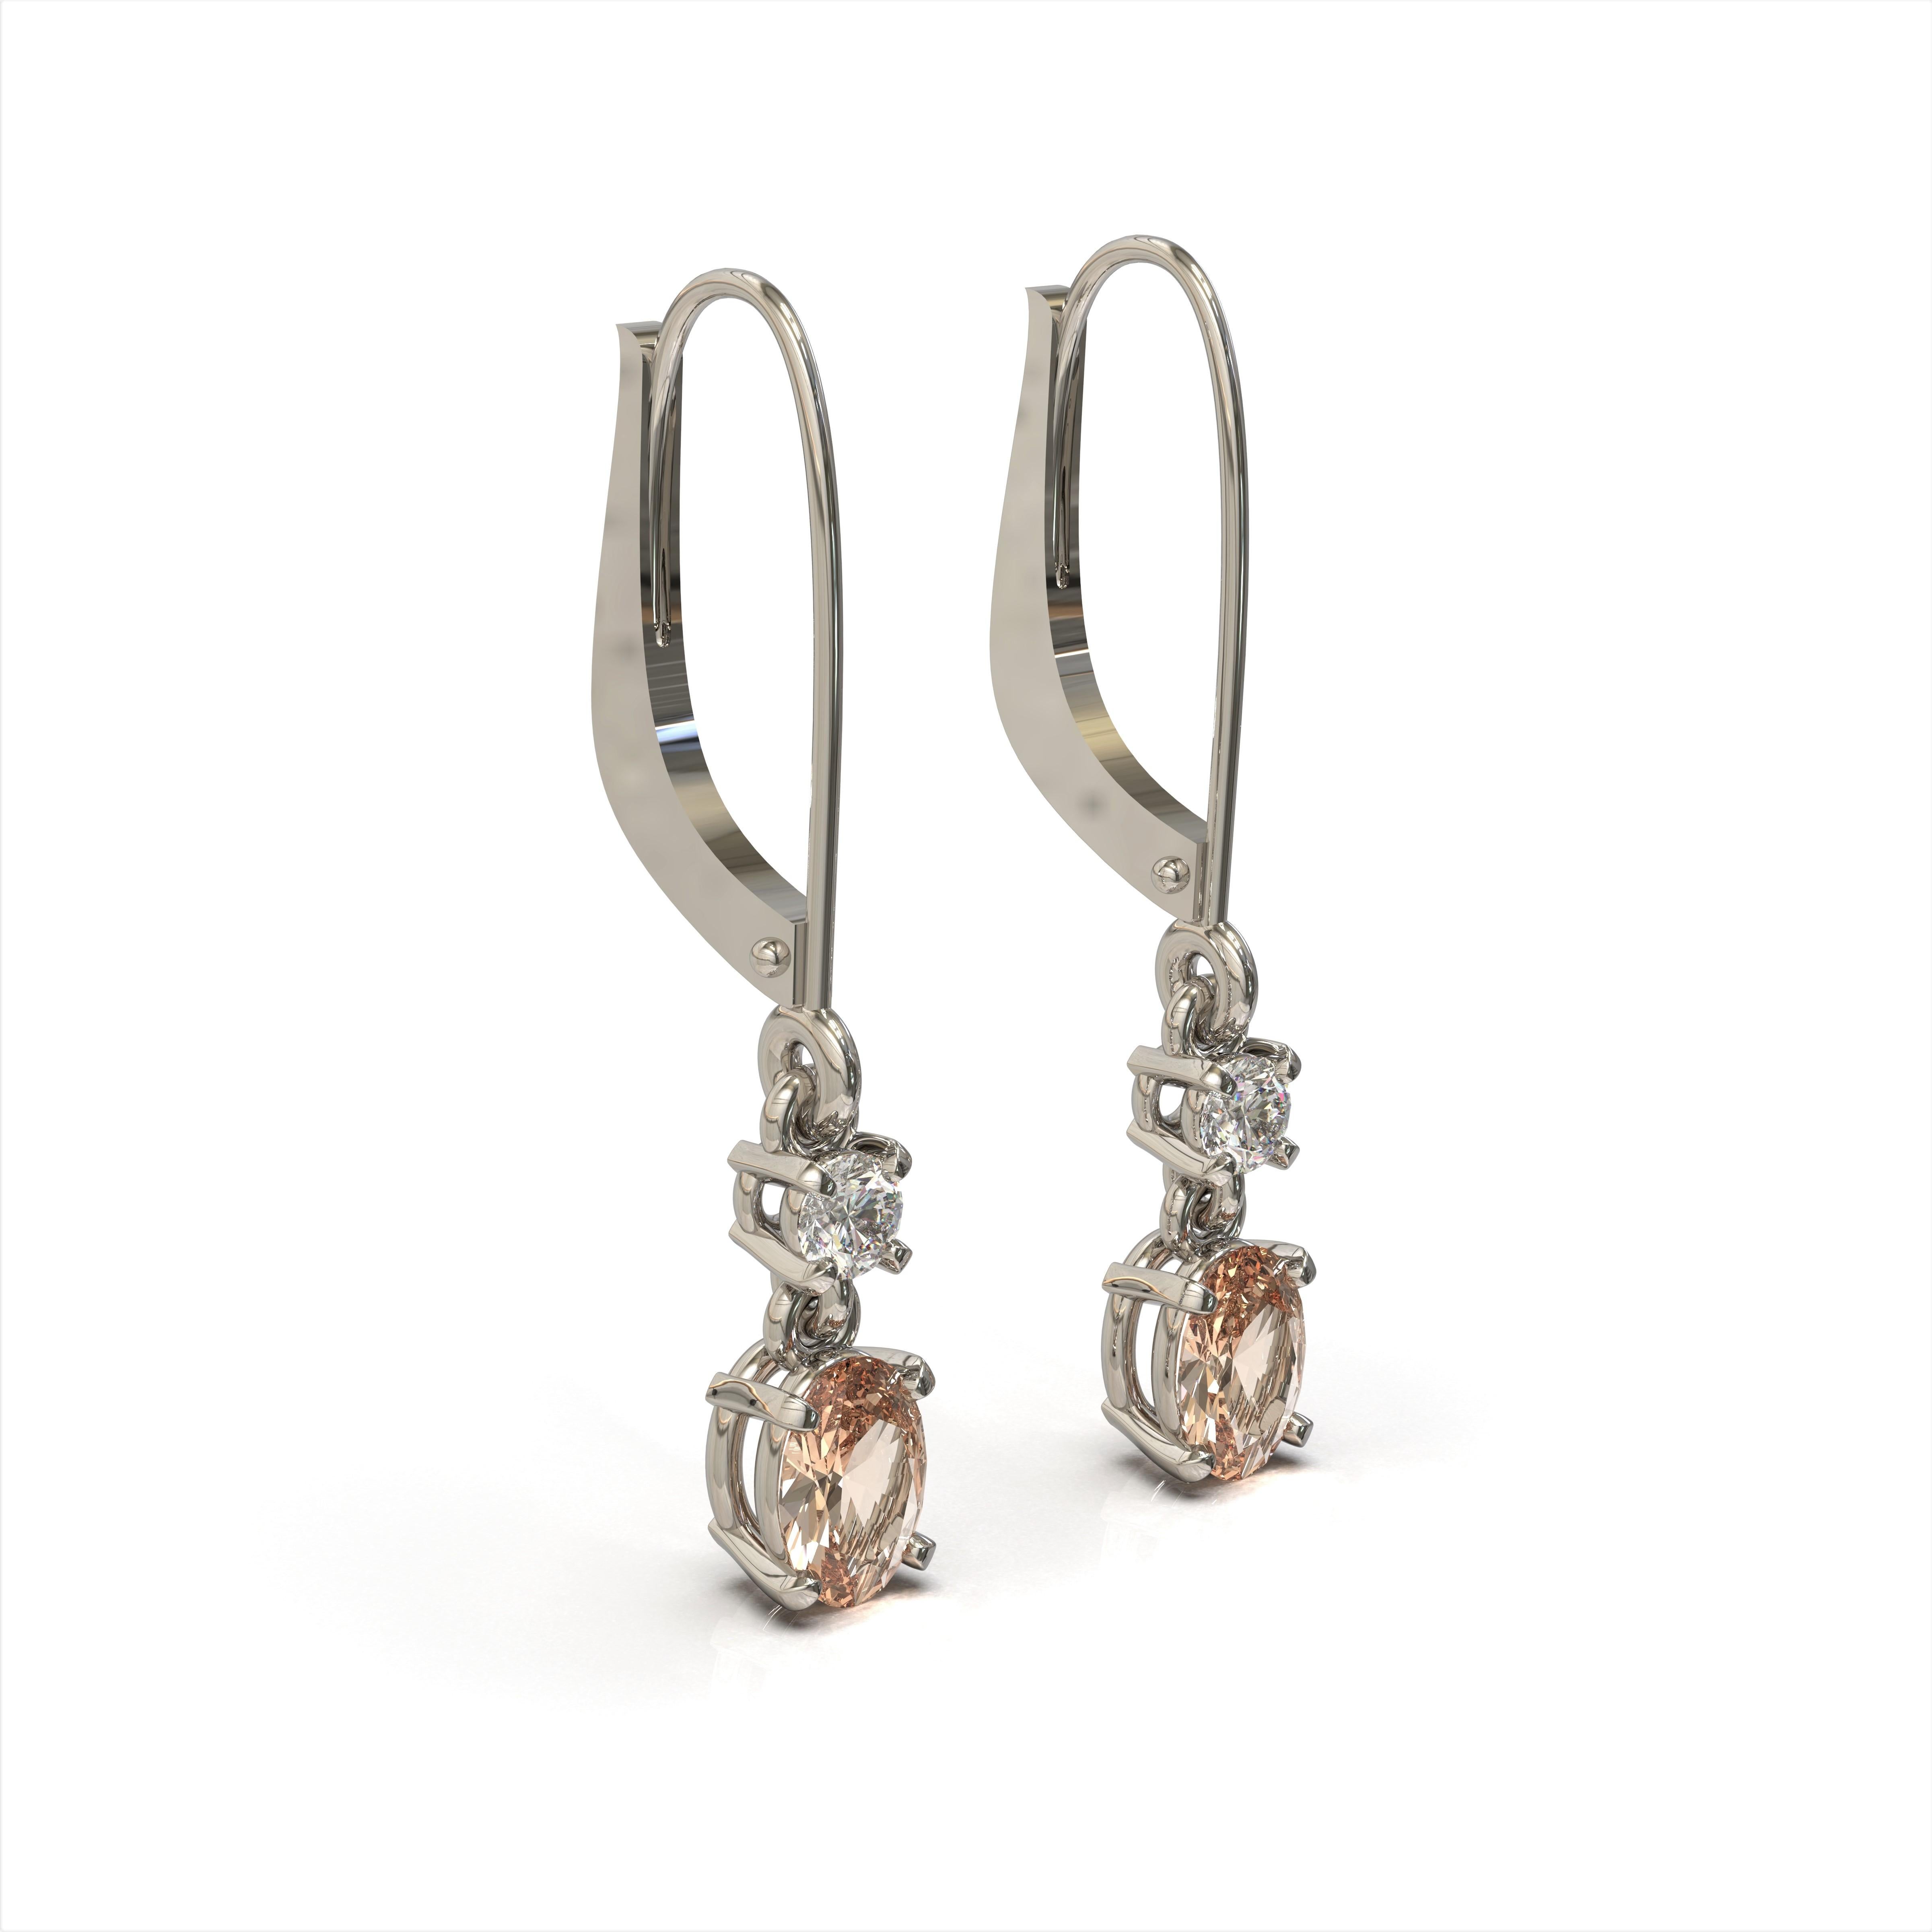 Orecchini Di Diamante Morganite

These gorgeous earrings in 18 carat white gold feature a pair of lovely morganites each suspended from a petite finest white diamond and ultra-safe lever back earring findings.

Oval faceted Morganites: 0.86 carat